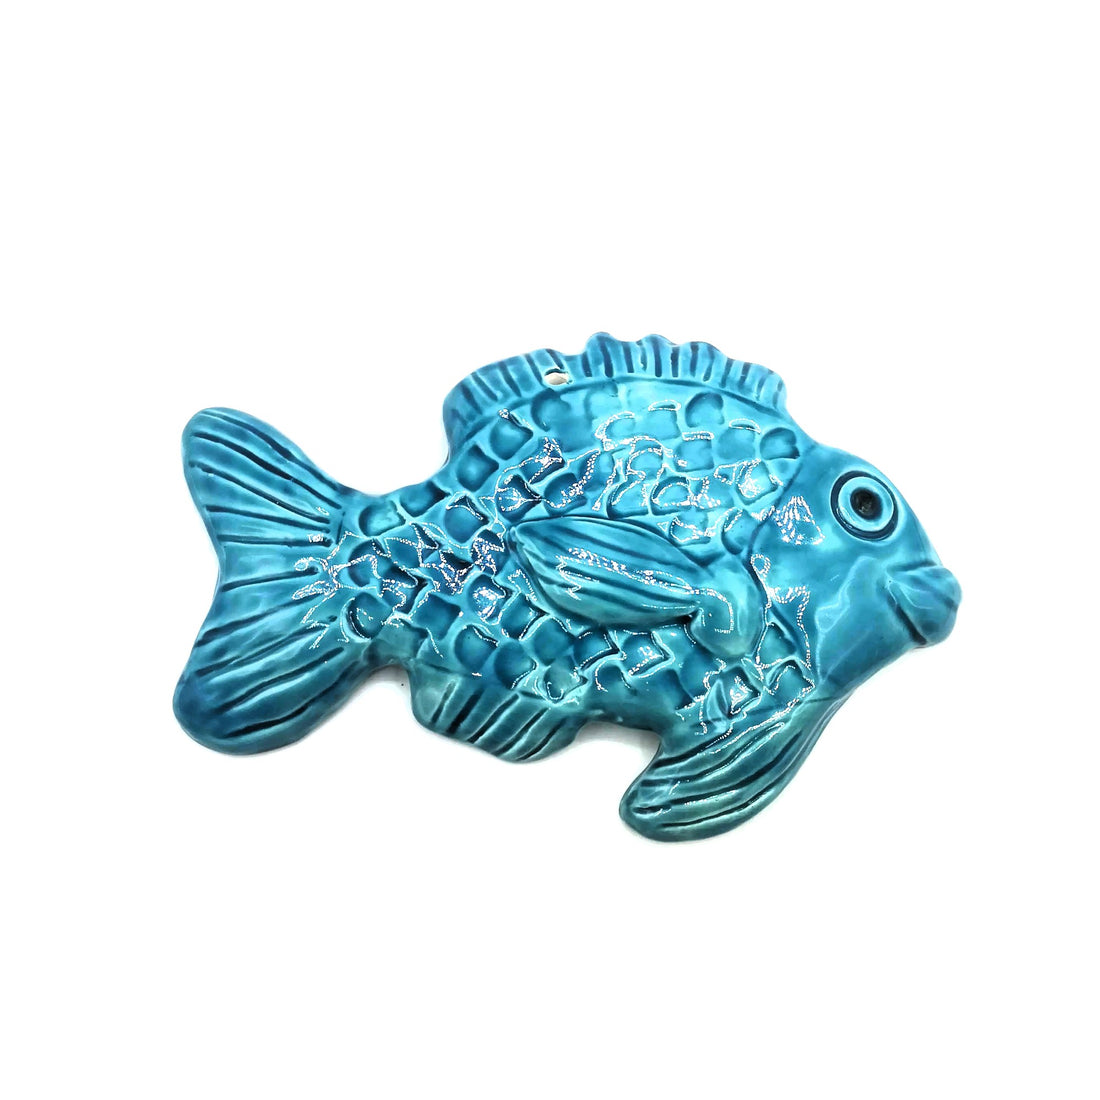 A blue ceramic fish on a white background